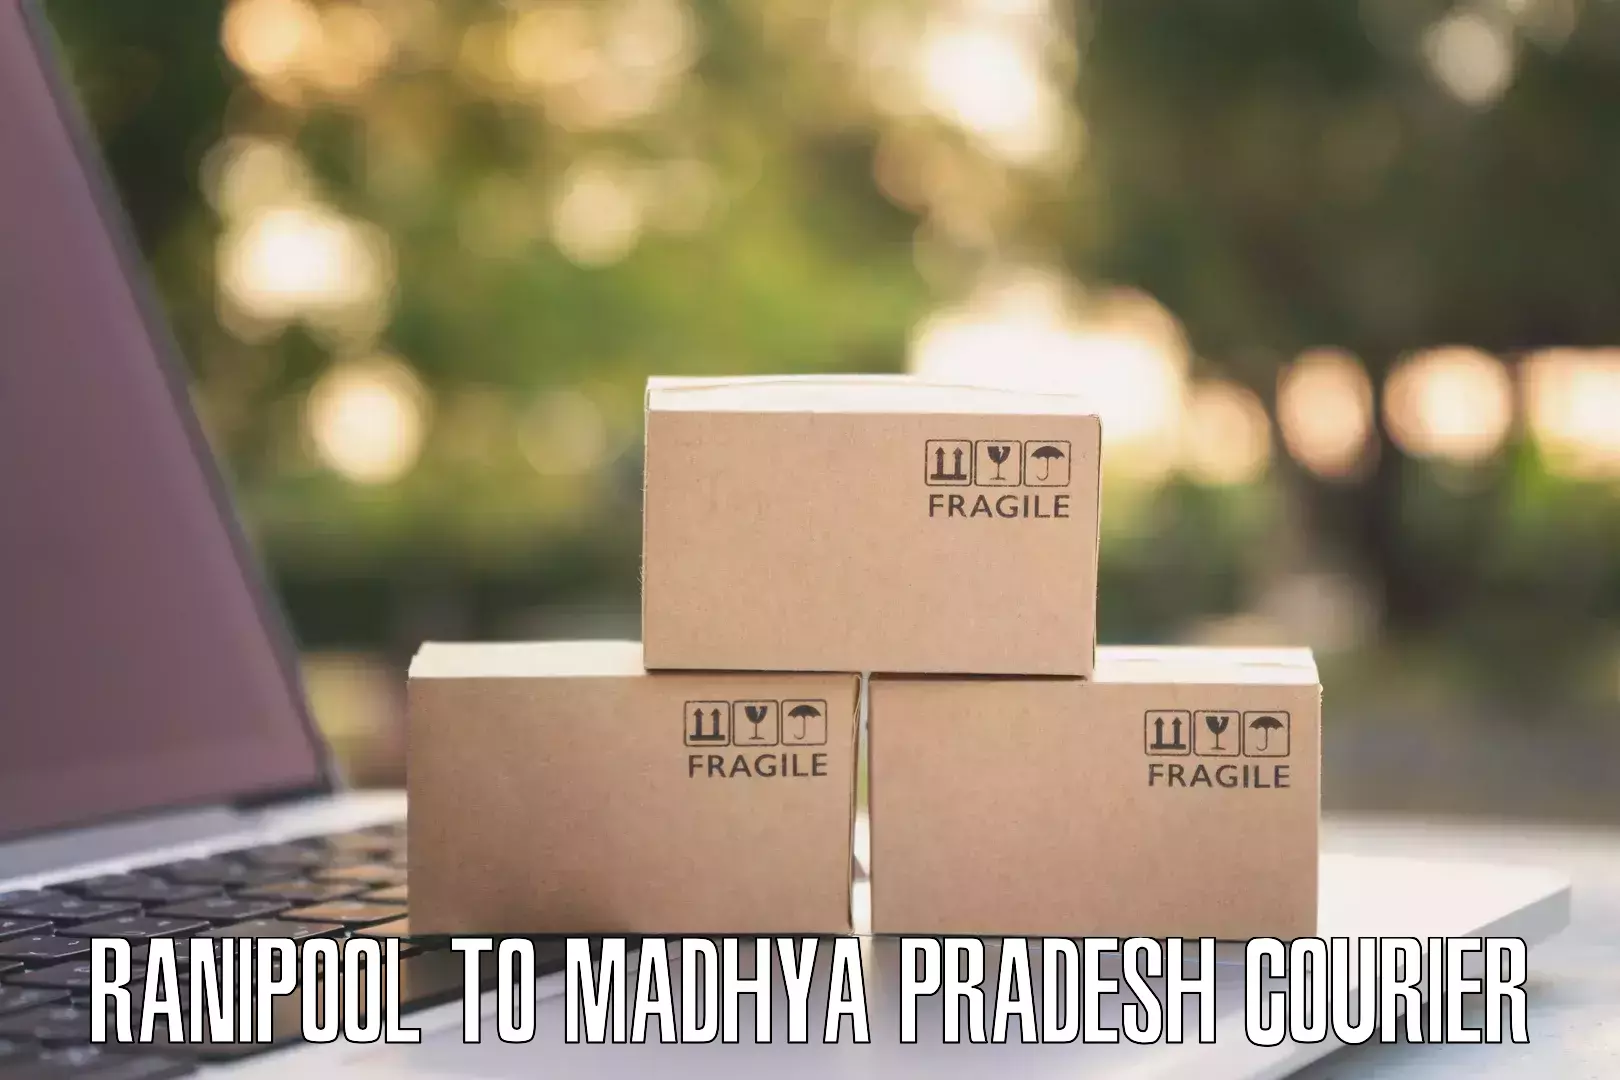 End-to-end delivery Ranipool to Madhya Pradesh